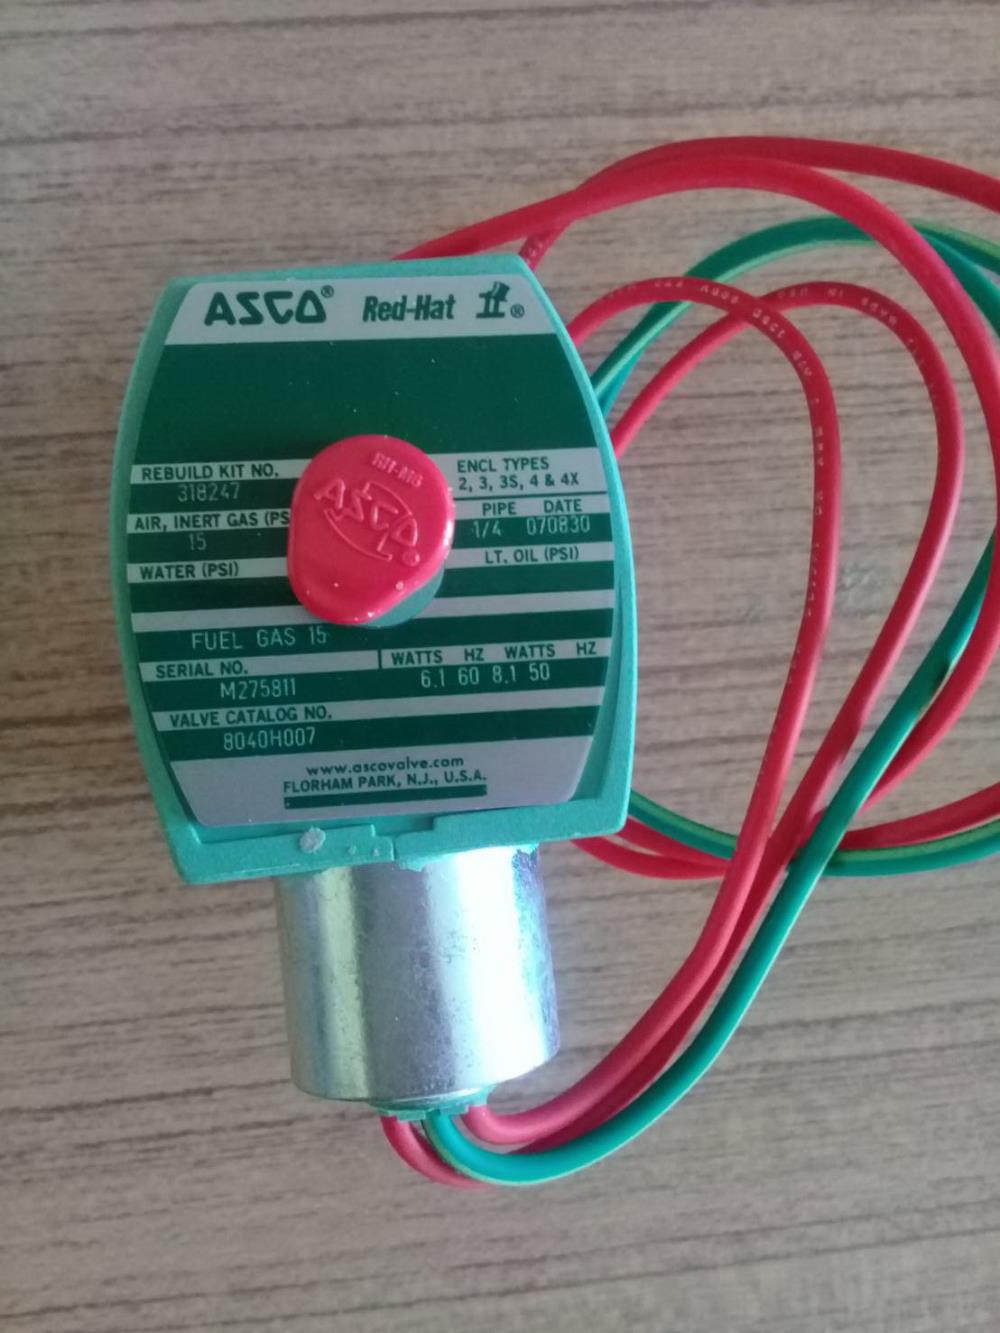 Asco 8040H007,Asco, 8040H007 , red-hat,Asco,Instruments and Controls/Controllers